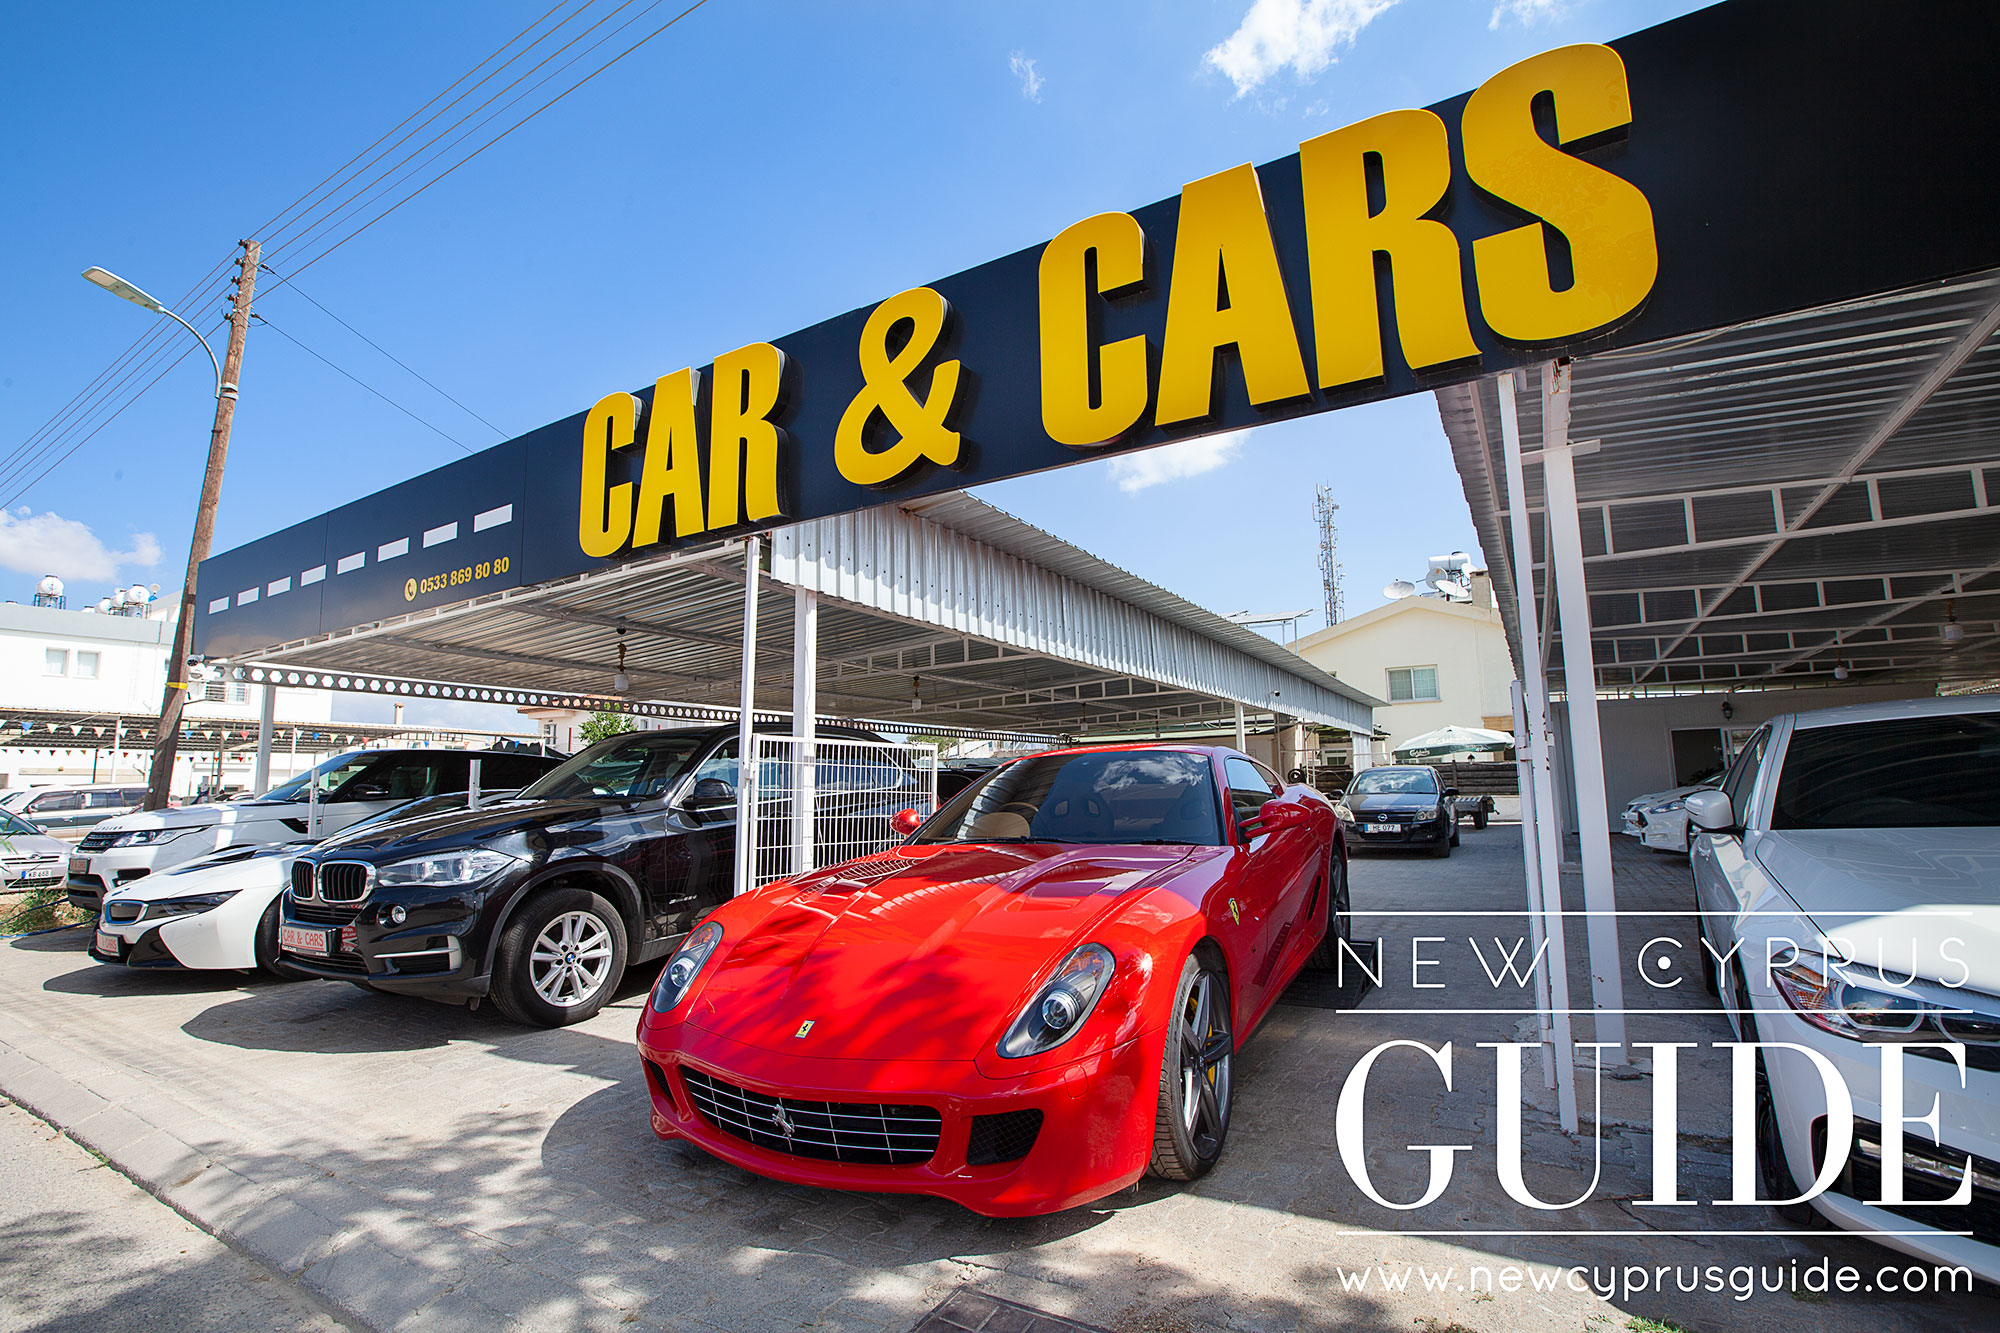 Car & Cars – New Cyprus Guide